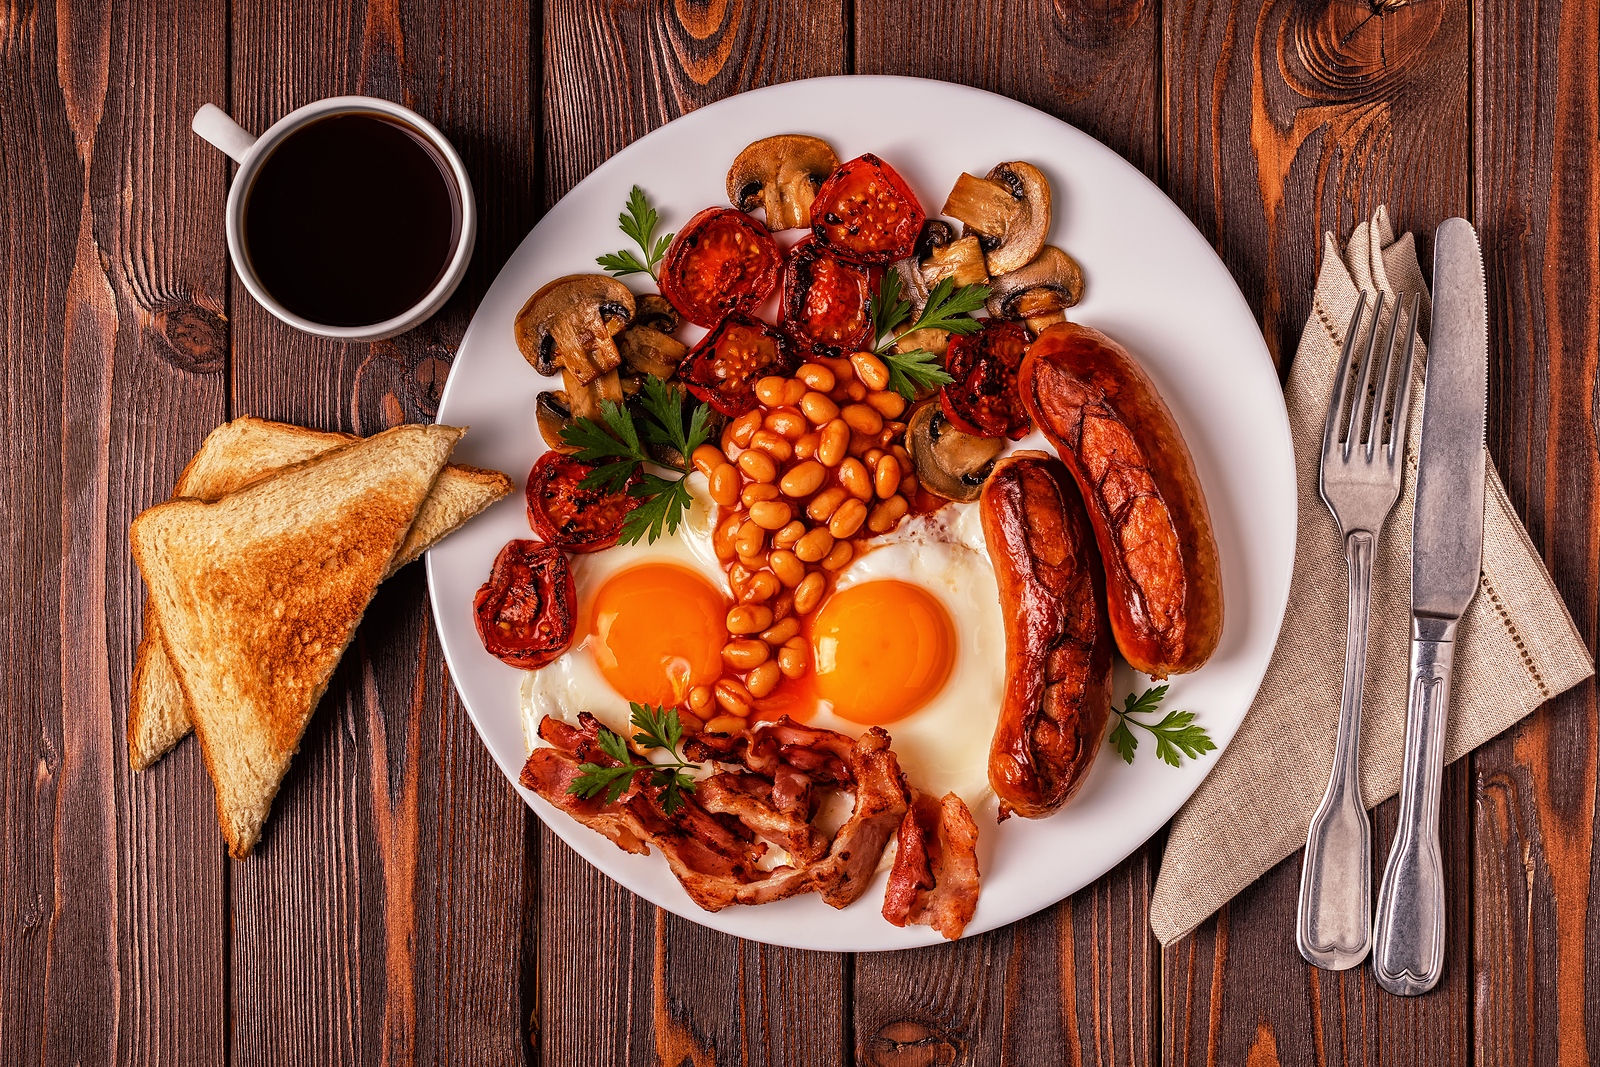 What is the nation's favourite fry up item